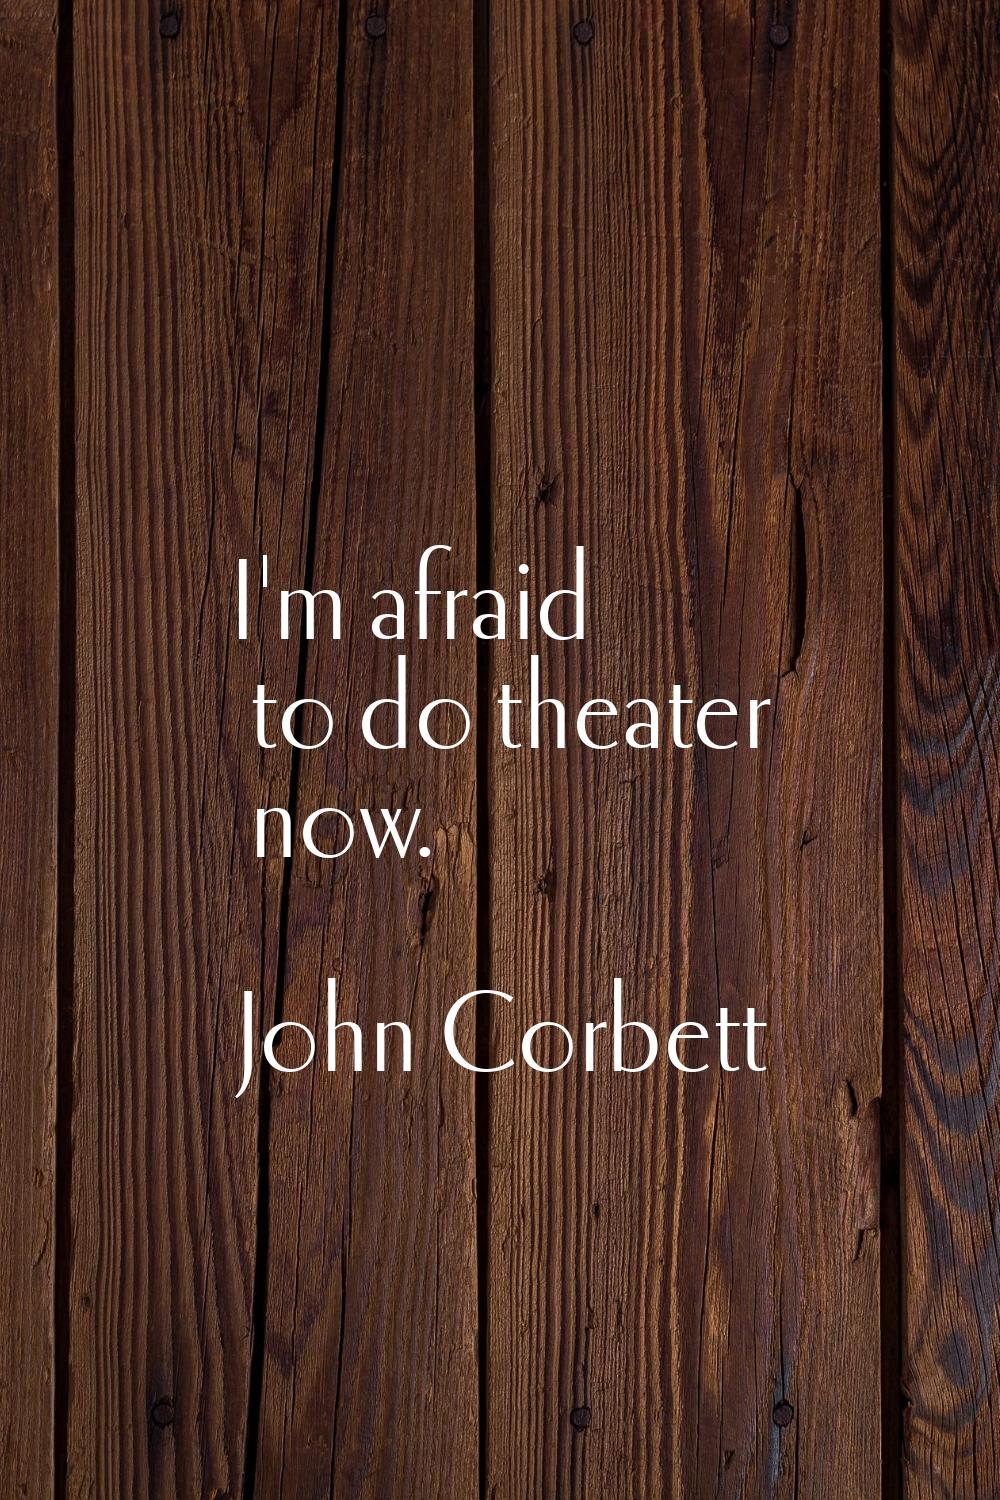 I'm afraid to do theater now.